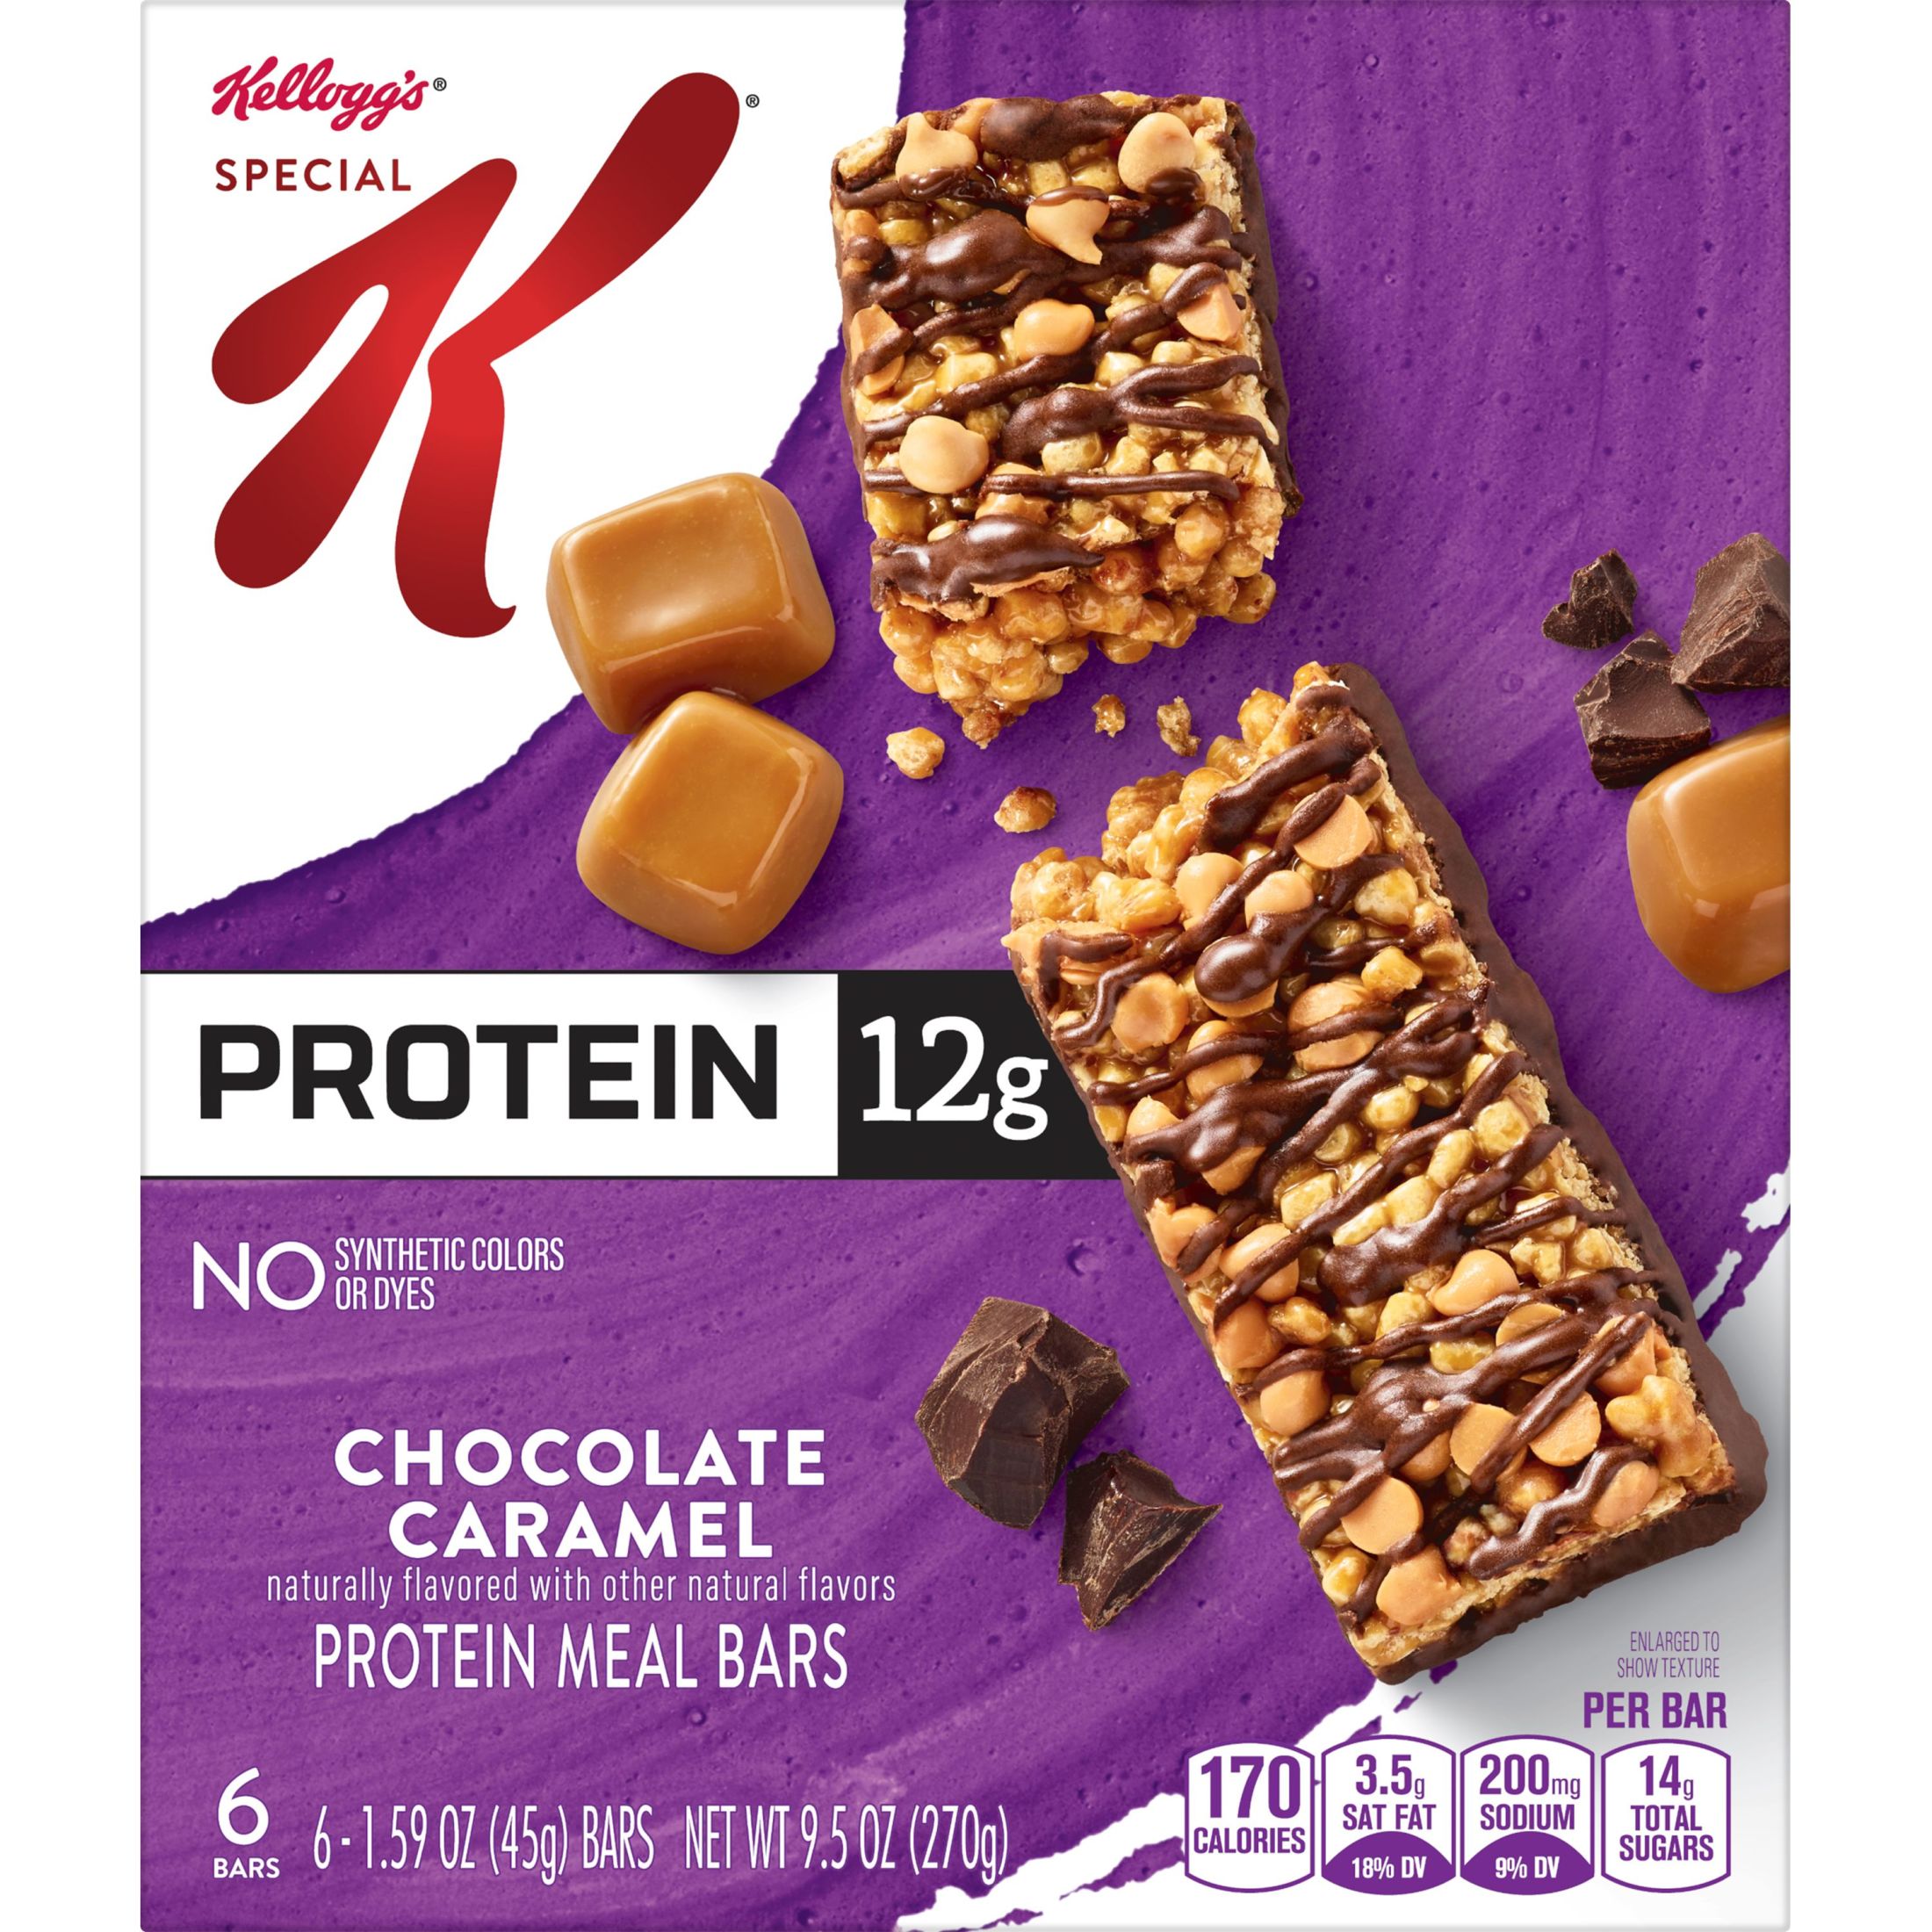 Kellogg's Special K Chocolate Caramel Chewy Protein Bars, Ready-to-Eat, 9.5 oz, 6 Count - image 4 of 11